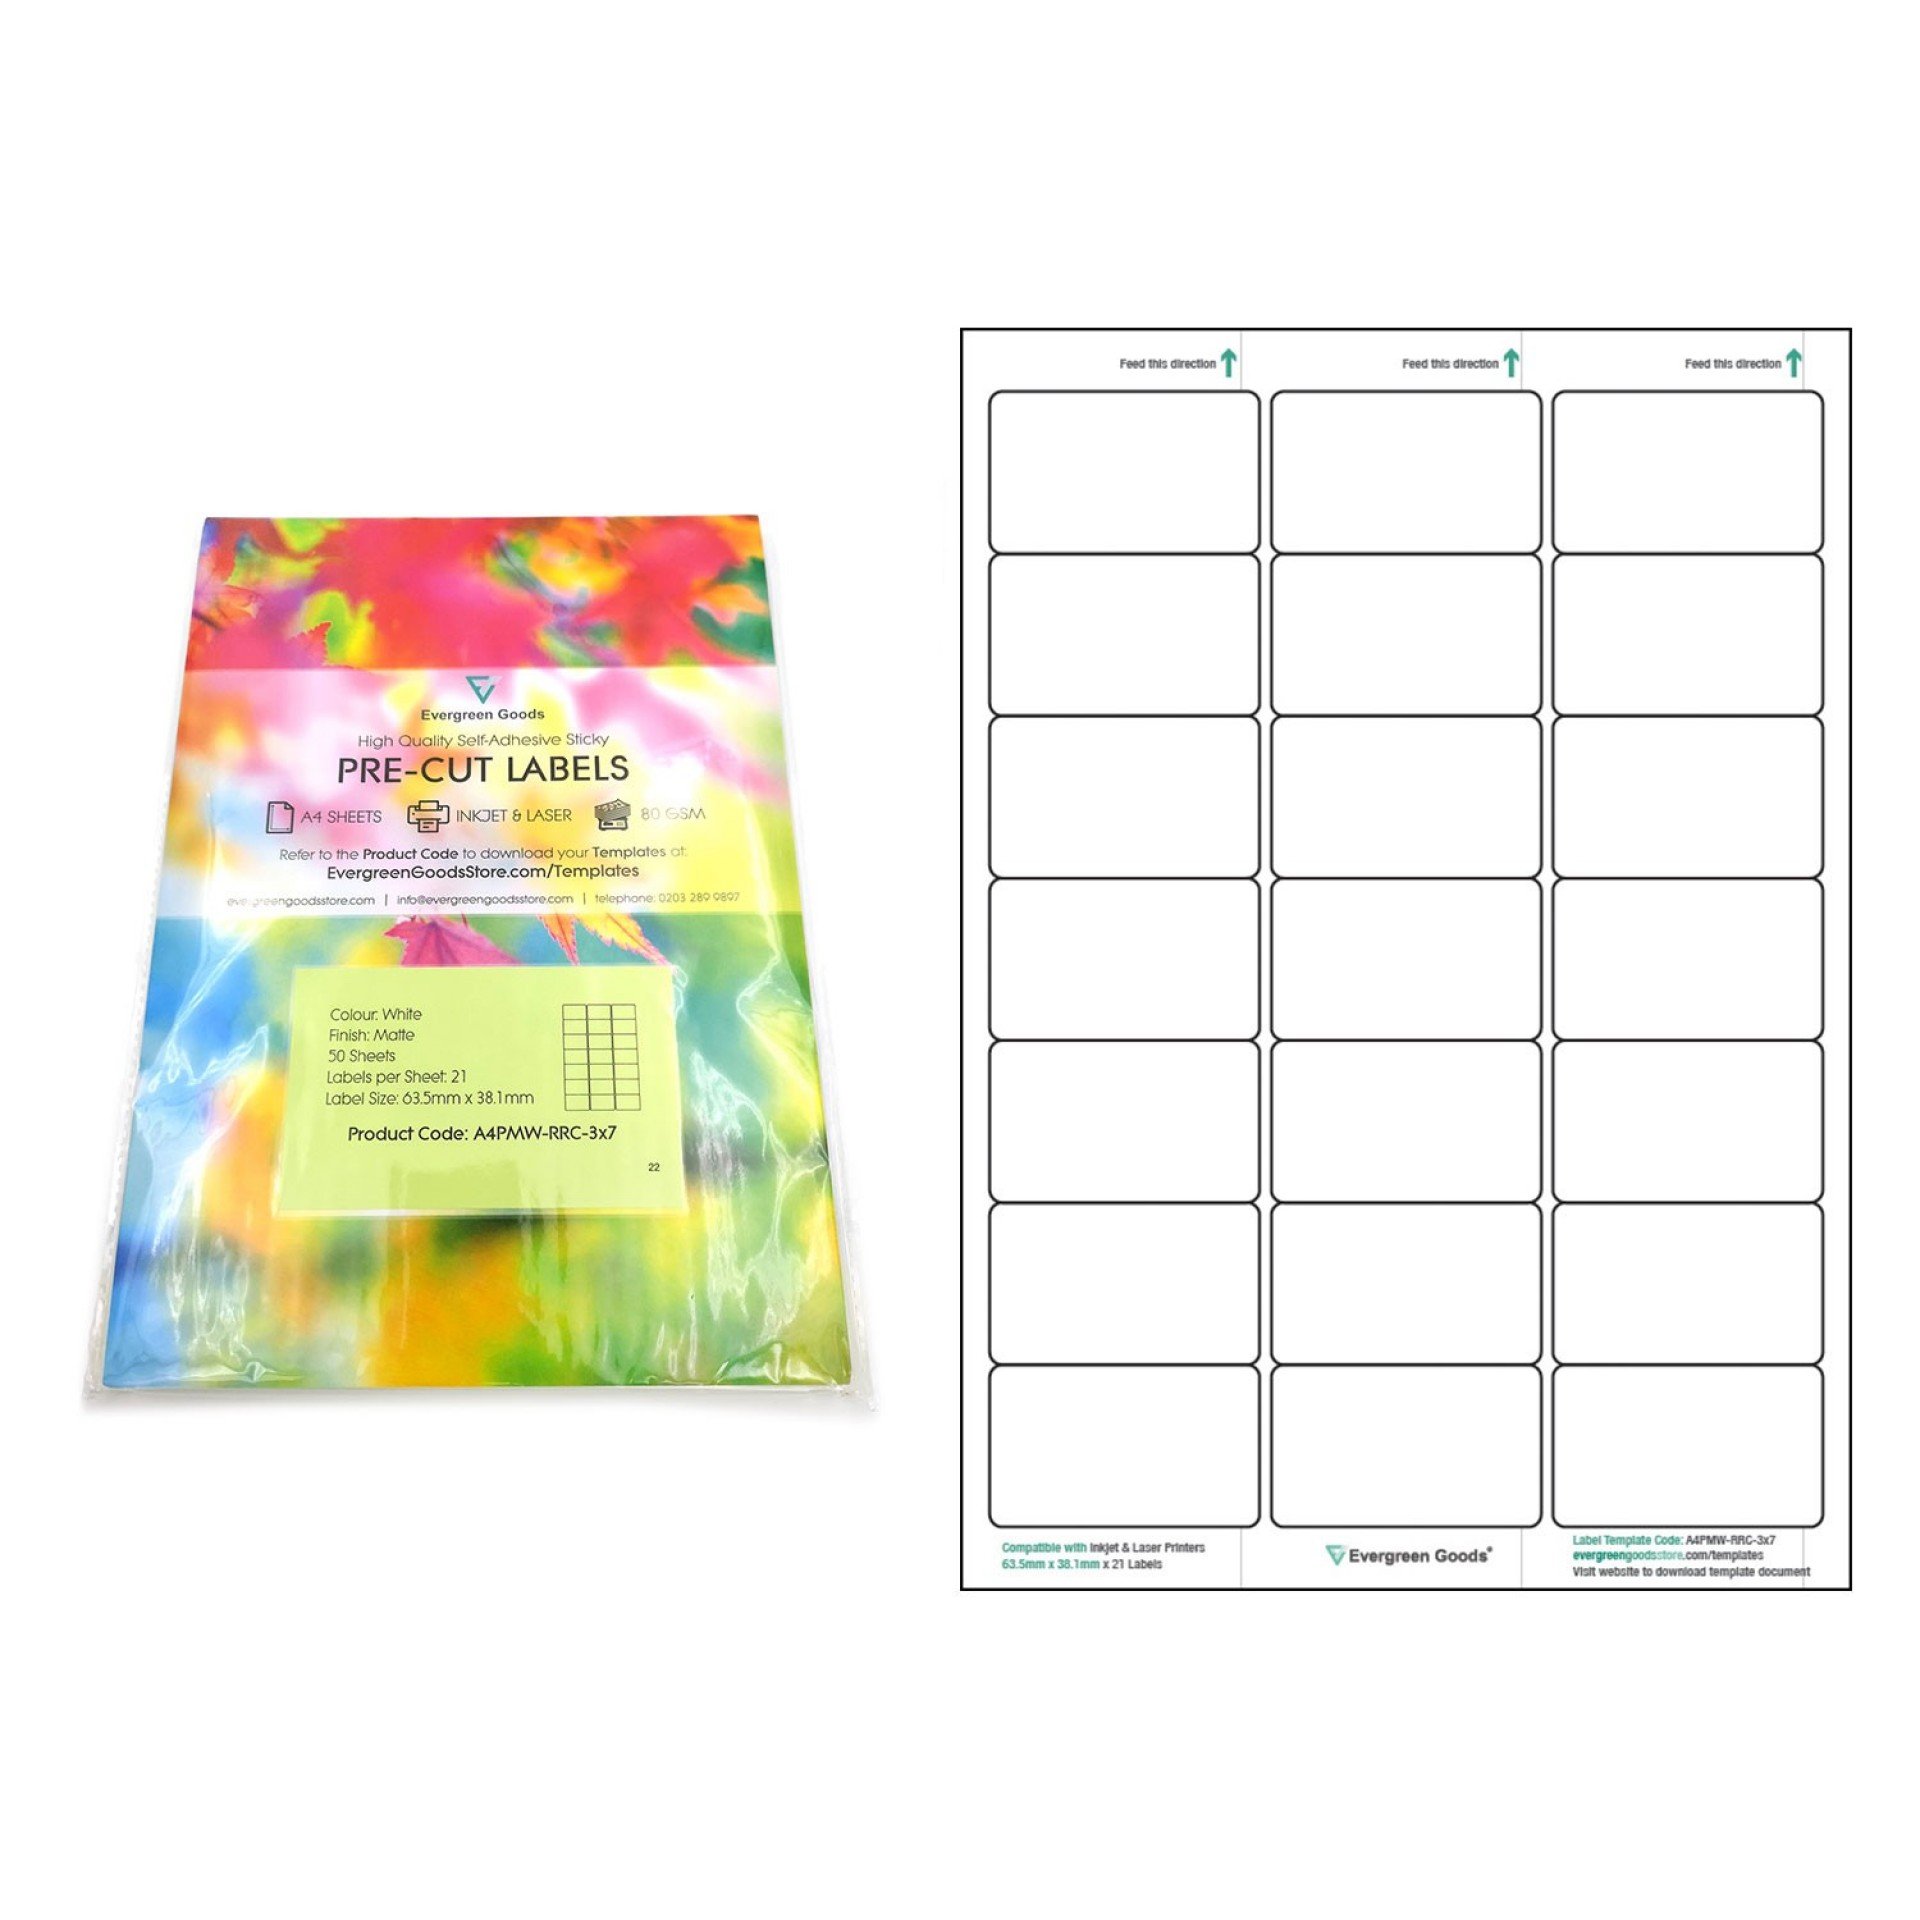 001 Word Label Template Per Sheet Ideas A4Pmw Rrc 3X7 With Word Label Template 21 Per Sheet